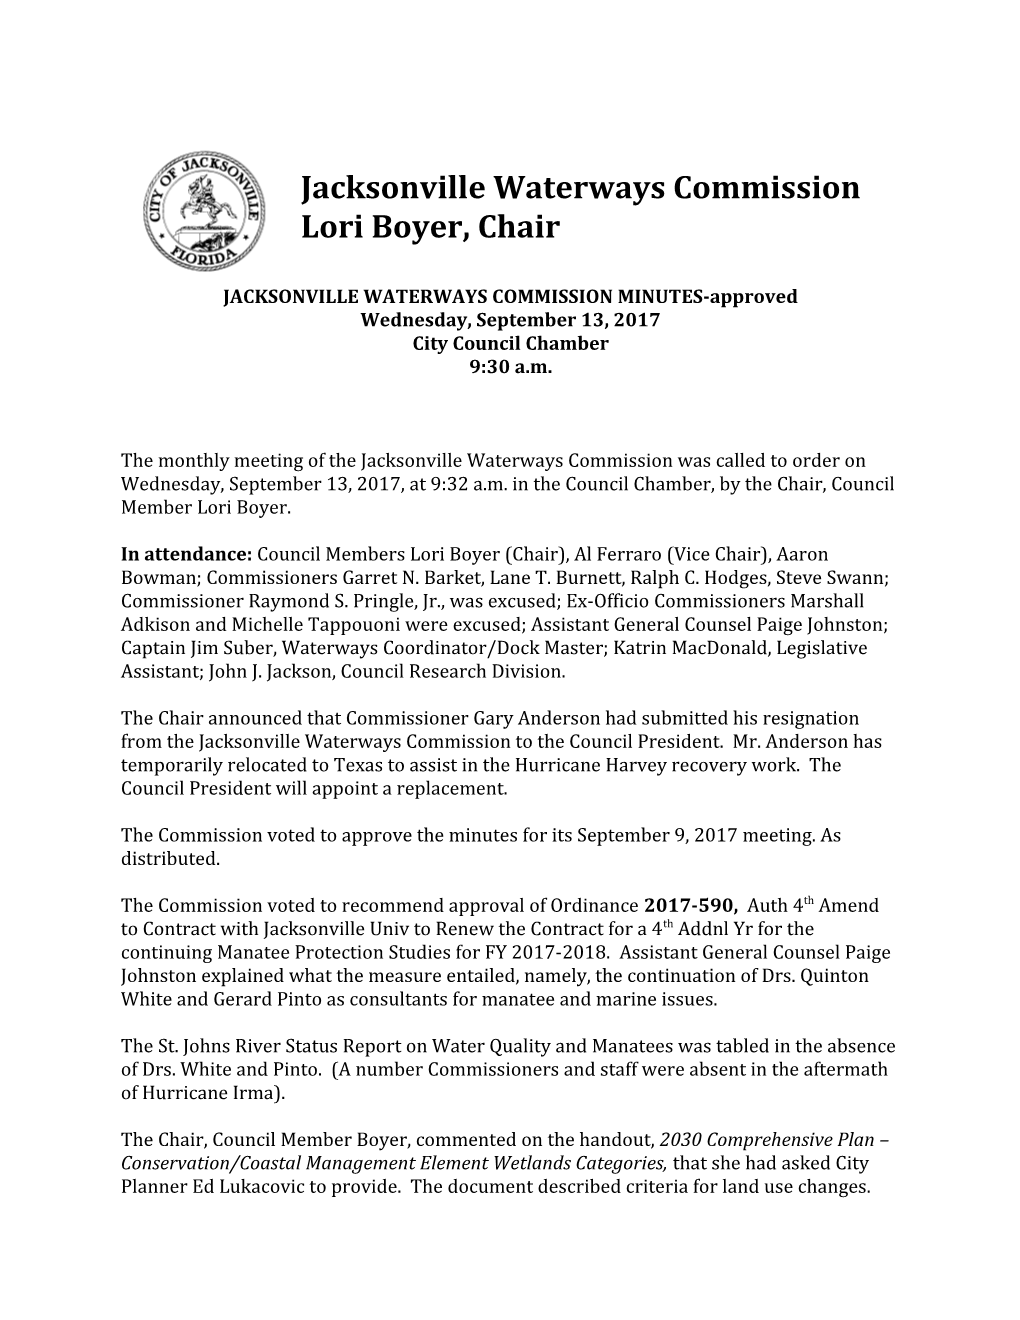 JACKSONVILLE WATERWAYS COMMISSION MINUTES-Approved